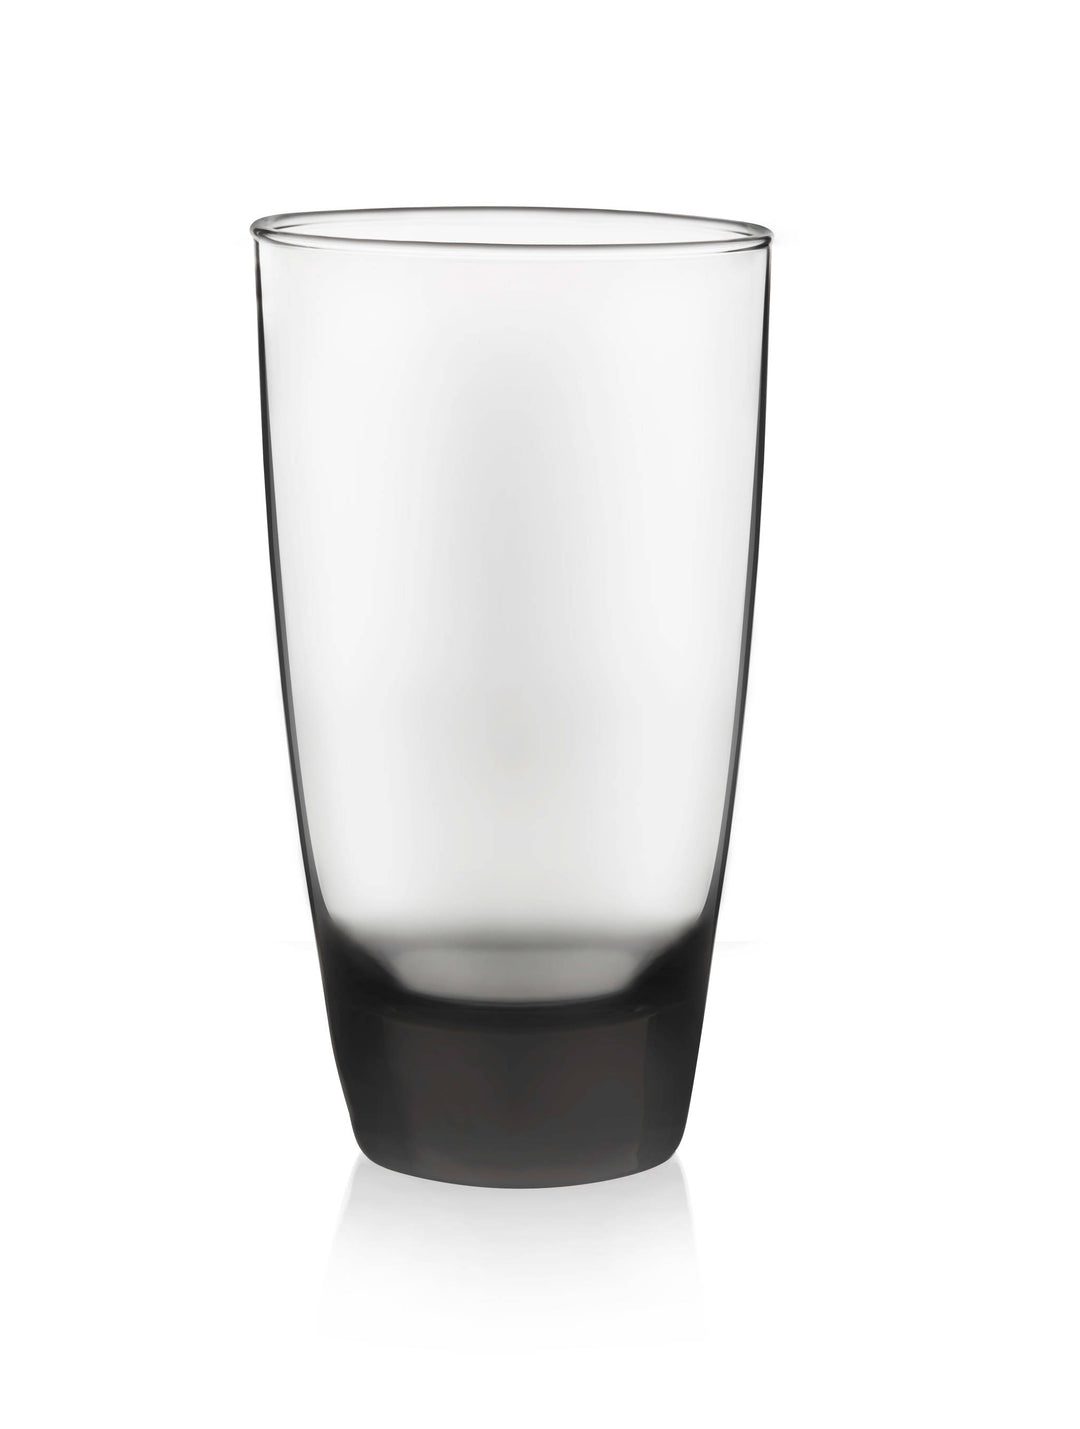 Includes 12, 18-ounce smoked cooler glasses